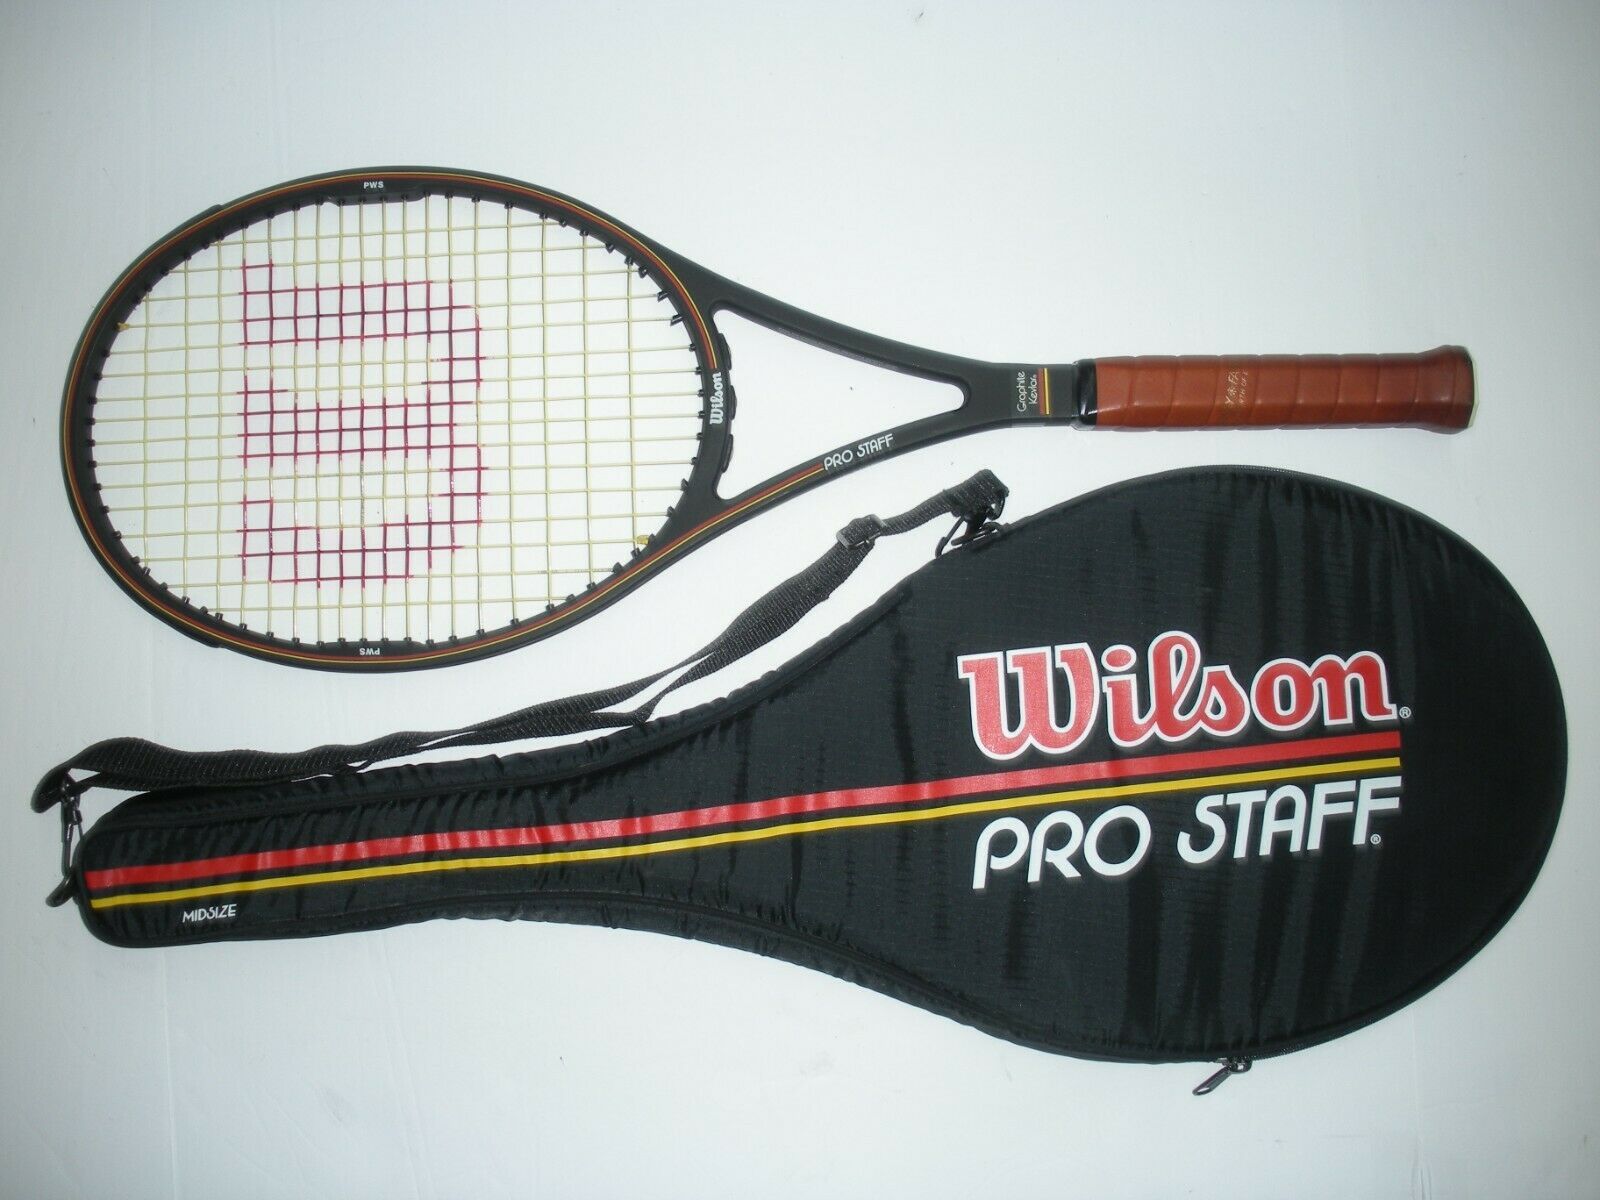 A Picture Of The Wilson Pro Staff 85 Original Racket